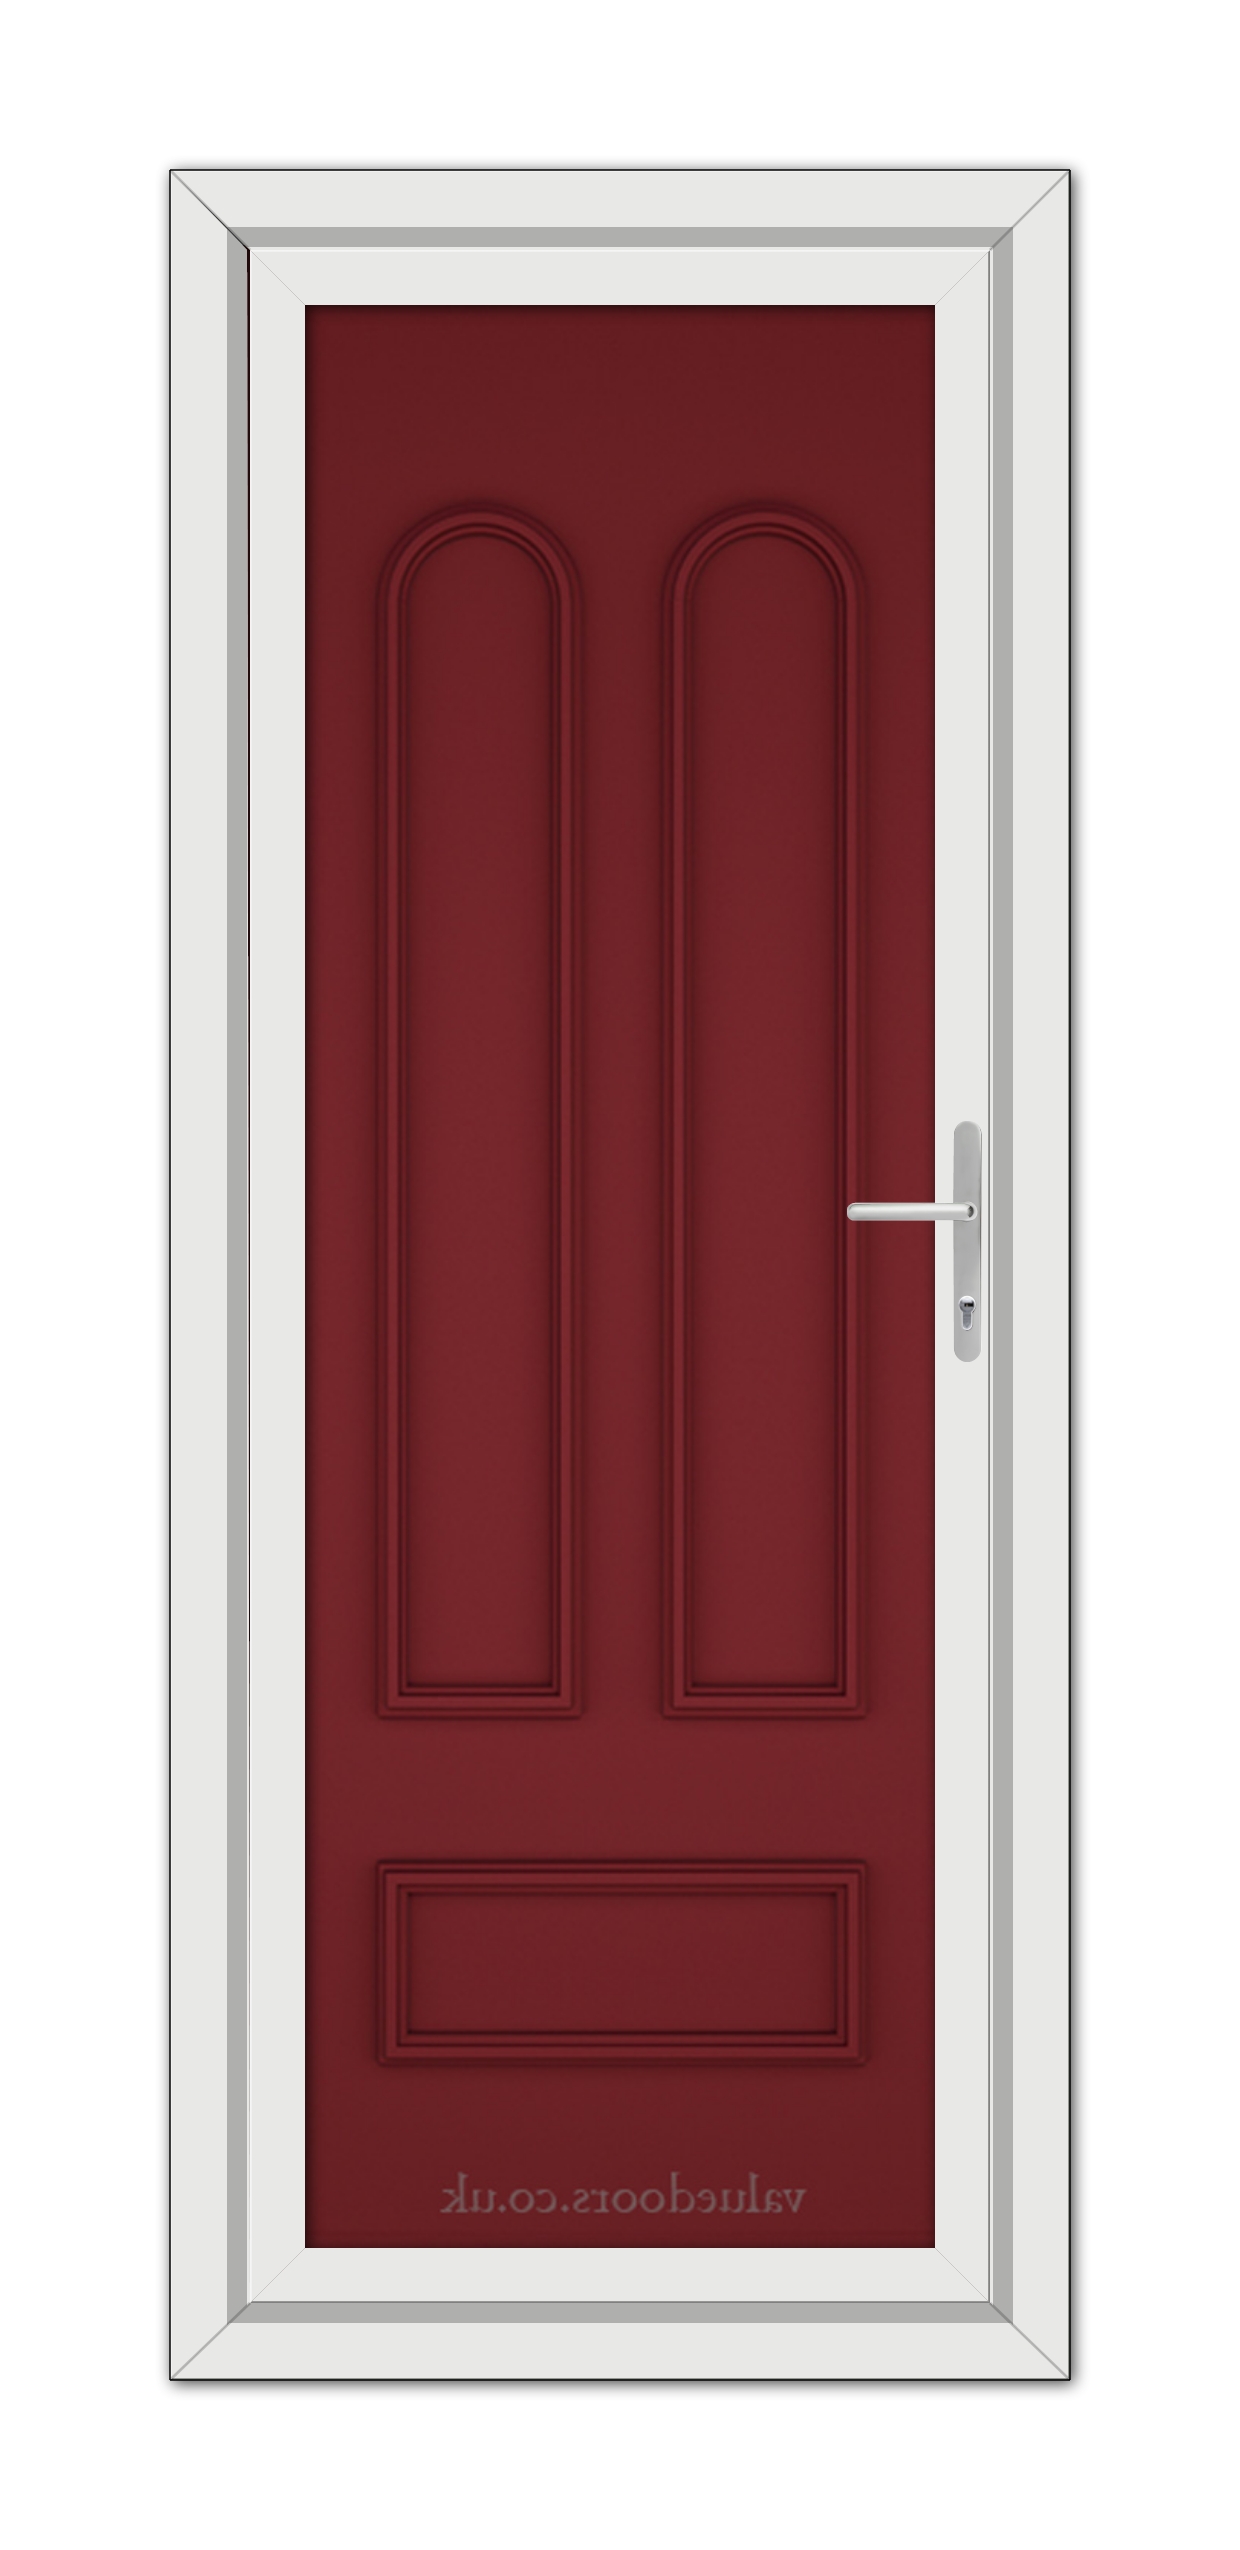 A modern Red Madrid Solid uPVC door with a white frame and a silver handle, viewed head-on.